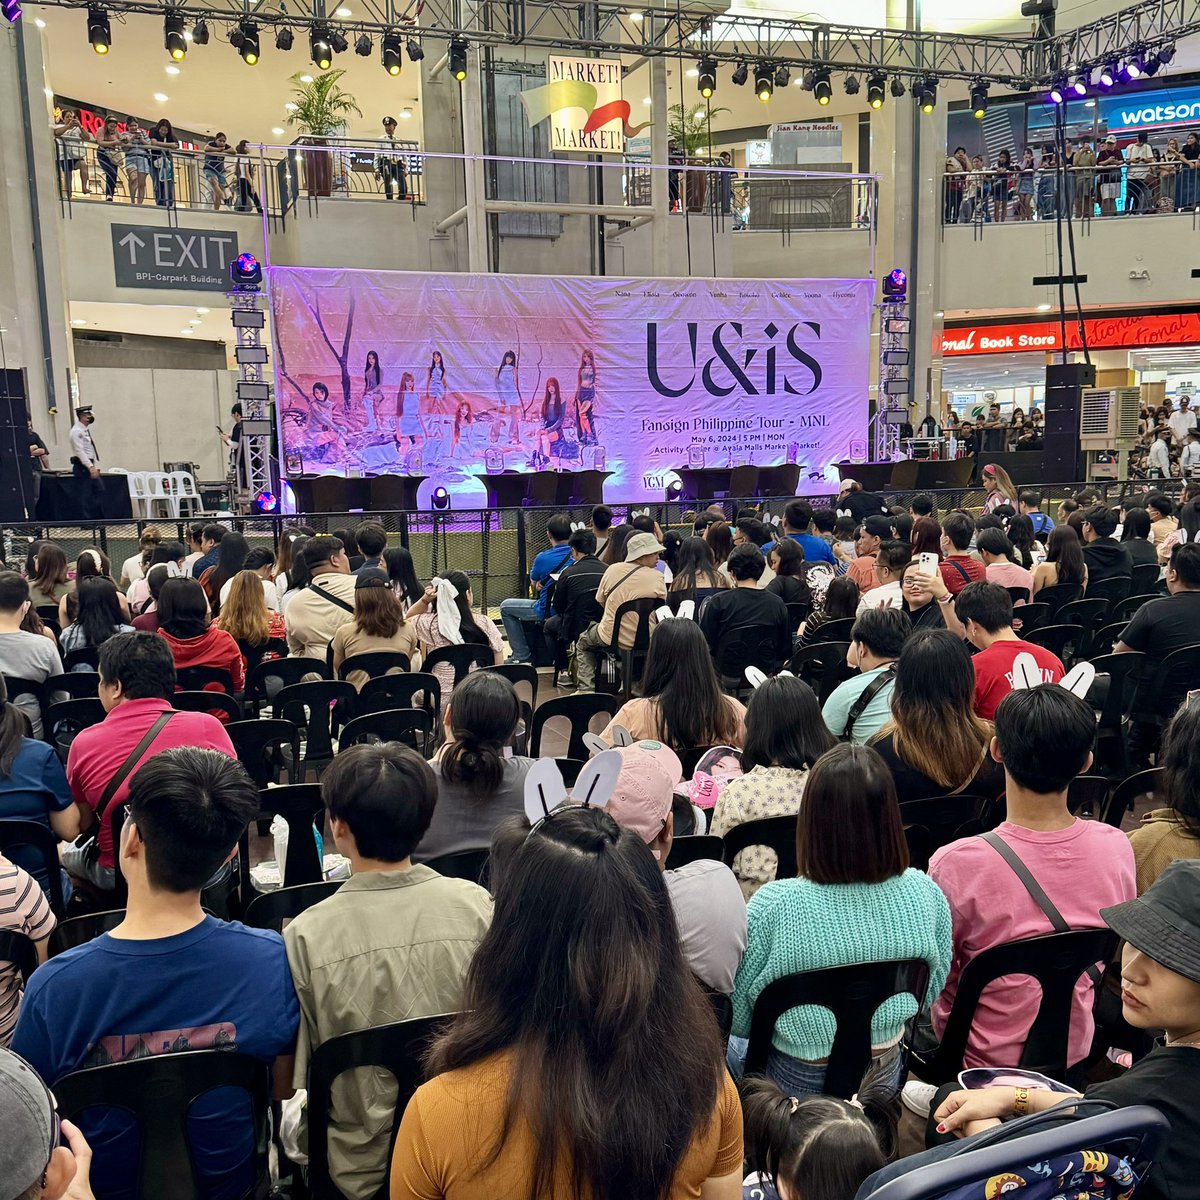 Show’s about to begin! Hurry to the Activity Center and join fellow fans for a fun afternoon with @UNIS_offcl! 💜

#UNISinMANILA #UNIS_Philippine_TourUNIS
#FunInTheFinds #ILoveMarketMarket